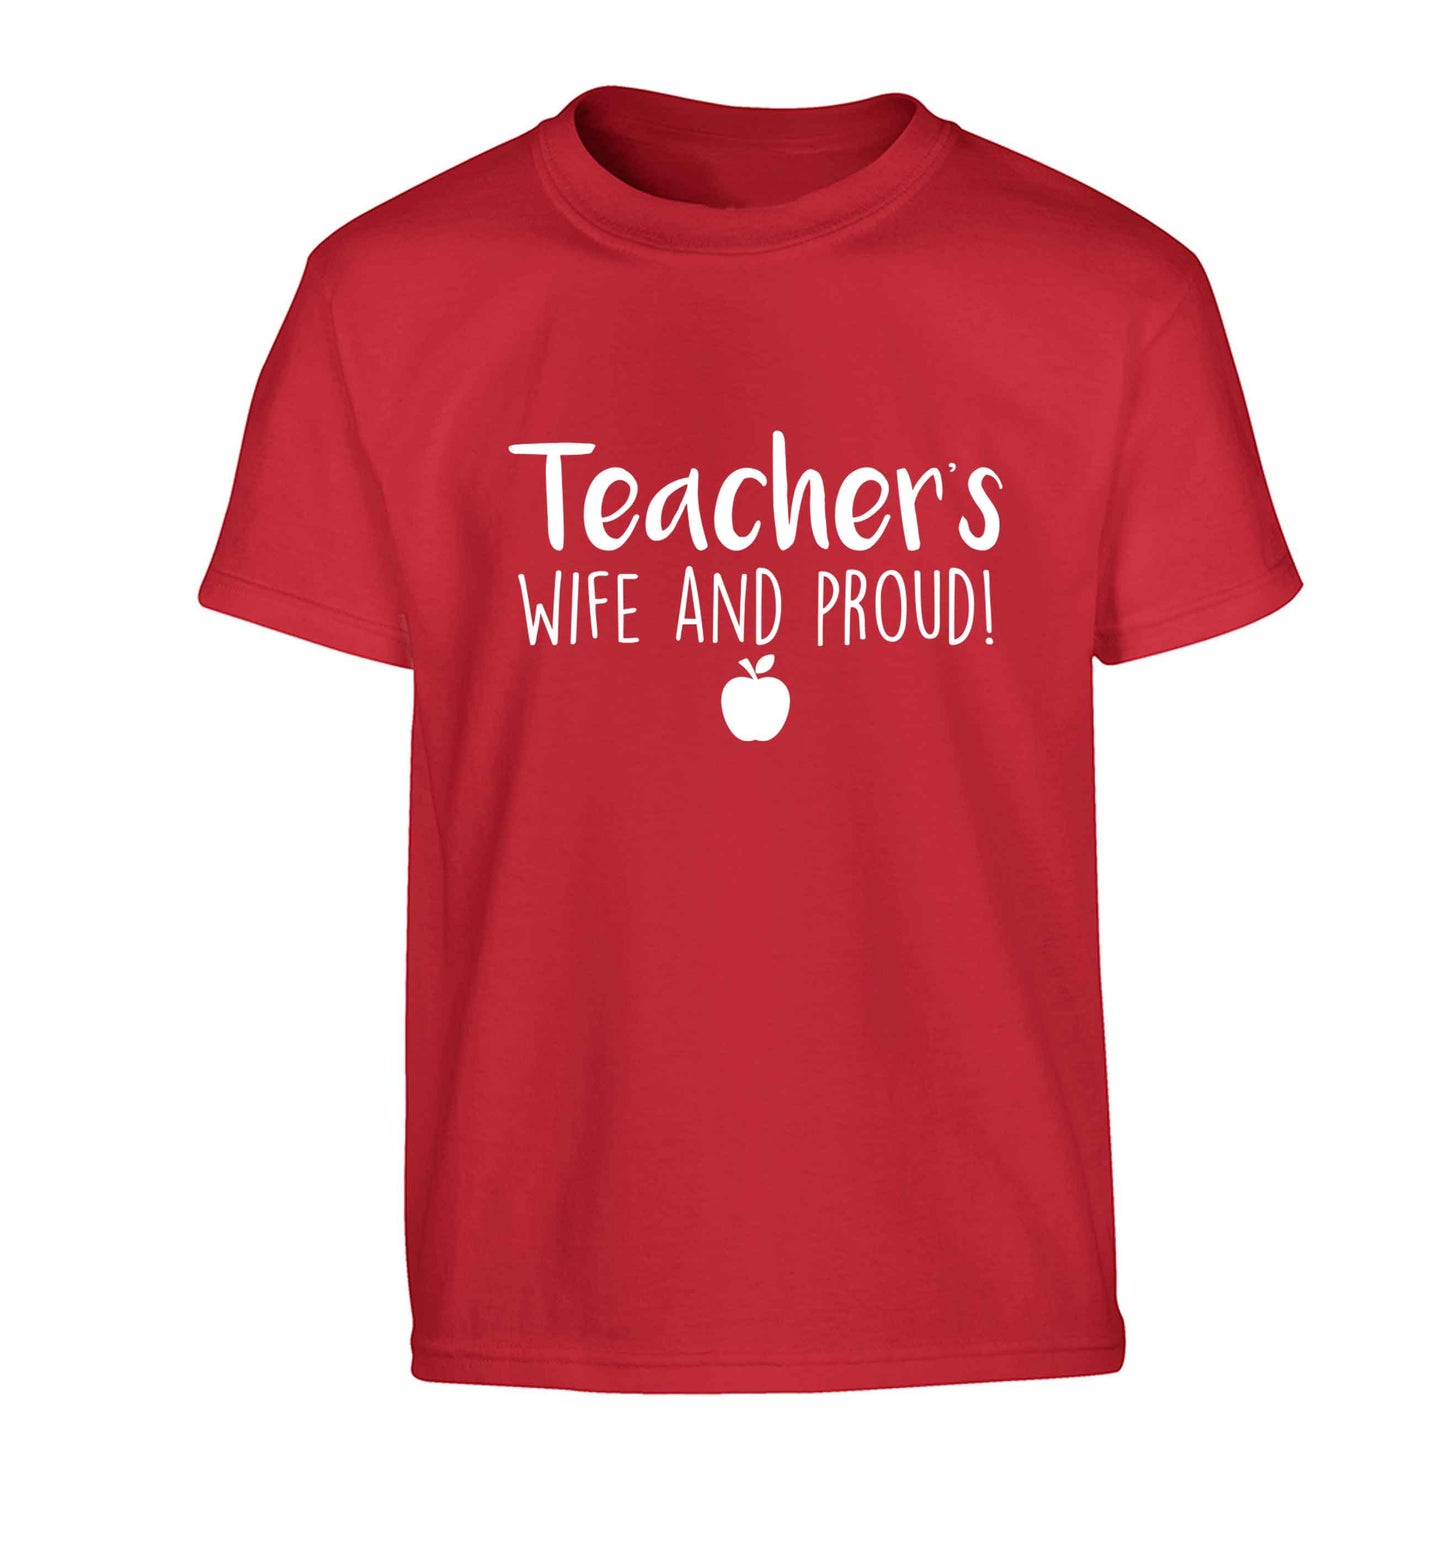 Teachers wife and proud Children's red Tshirt 12-13 Years